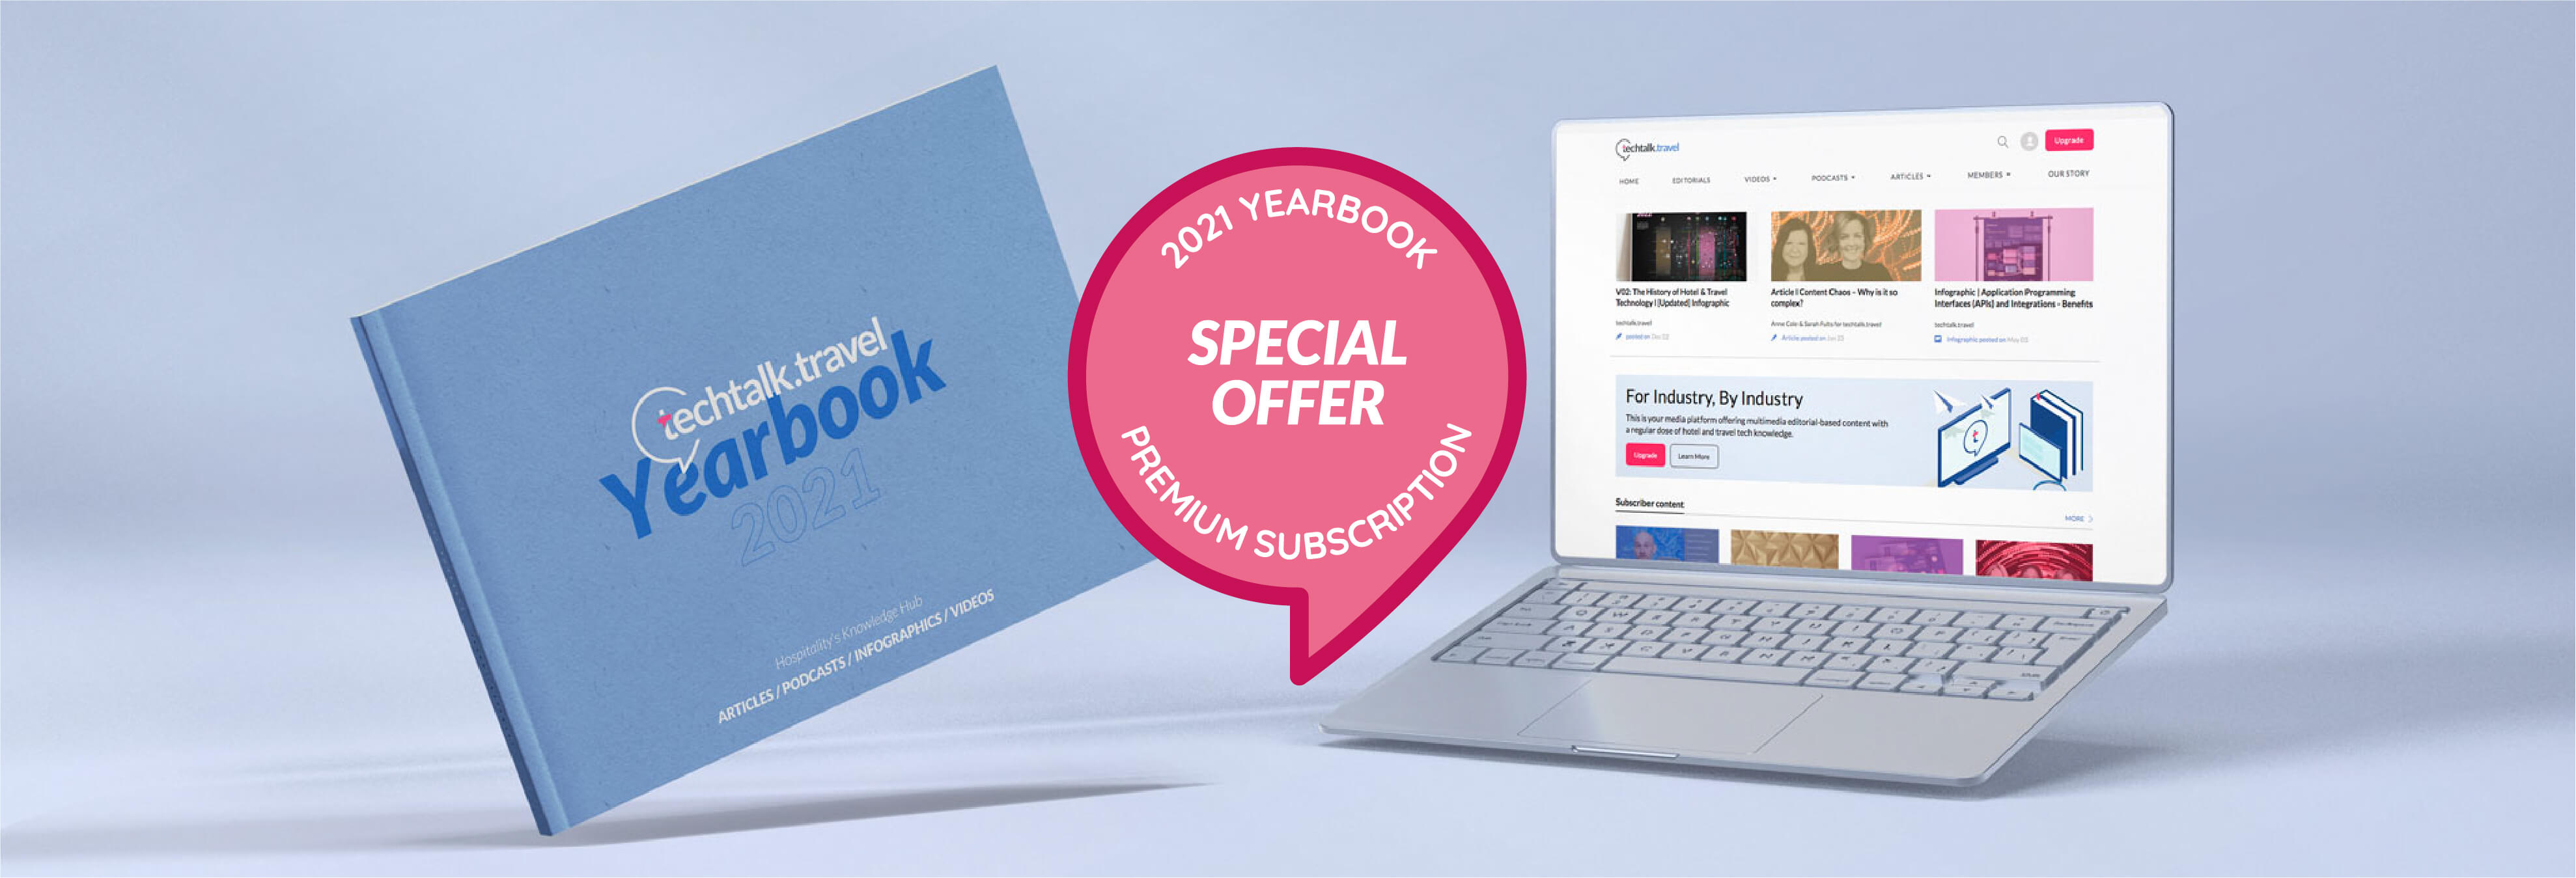 Special Offer - Yearbook 2021 - with Premium Subscription